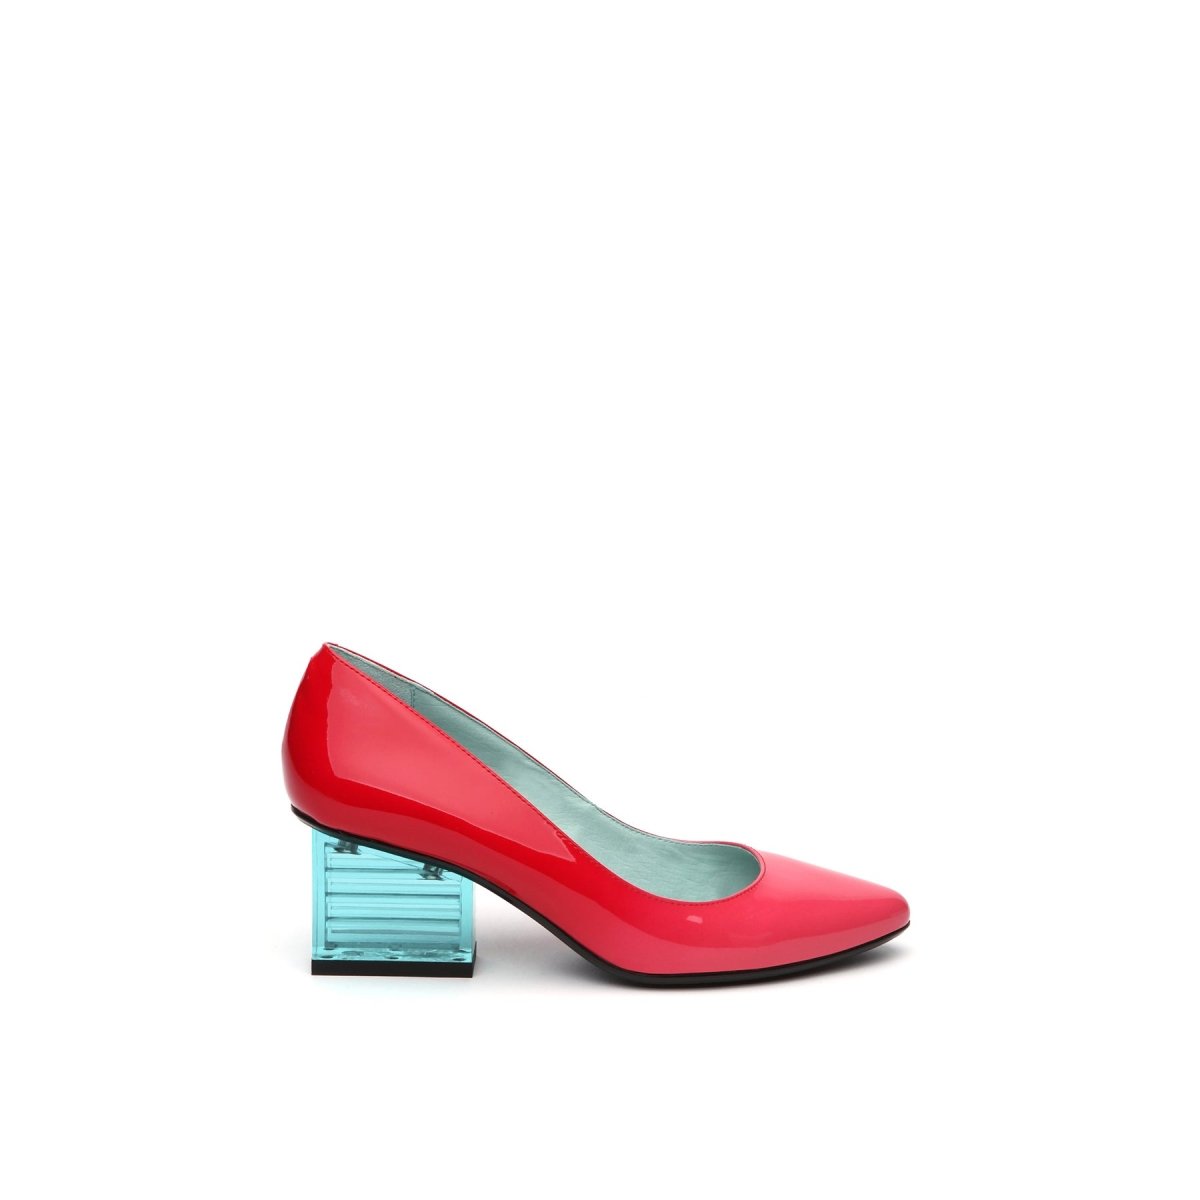 Coloring Ordinary Life Red Pumps - 0cm